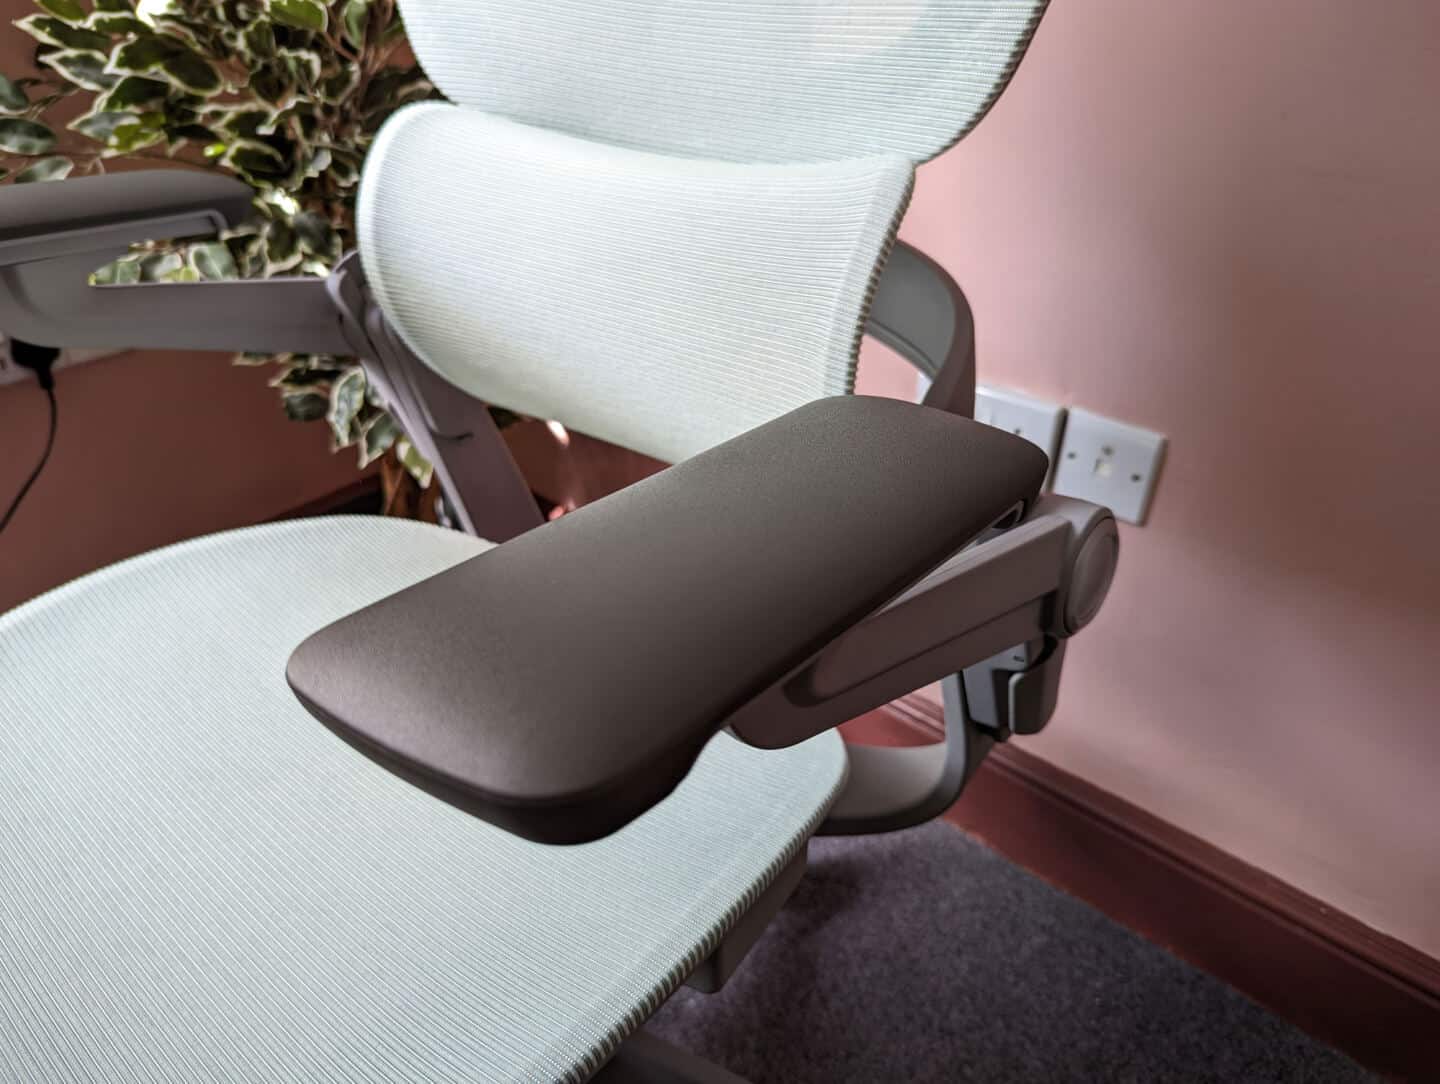 The armrest of the Hinomi H1 Pro Ergonomic Office Chair